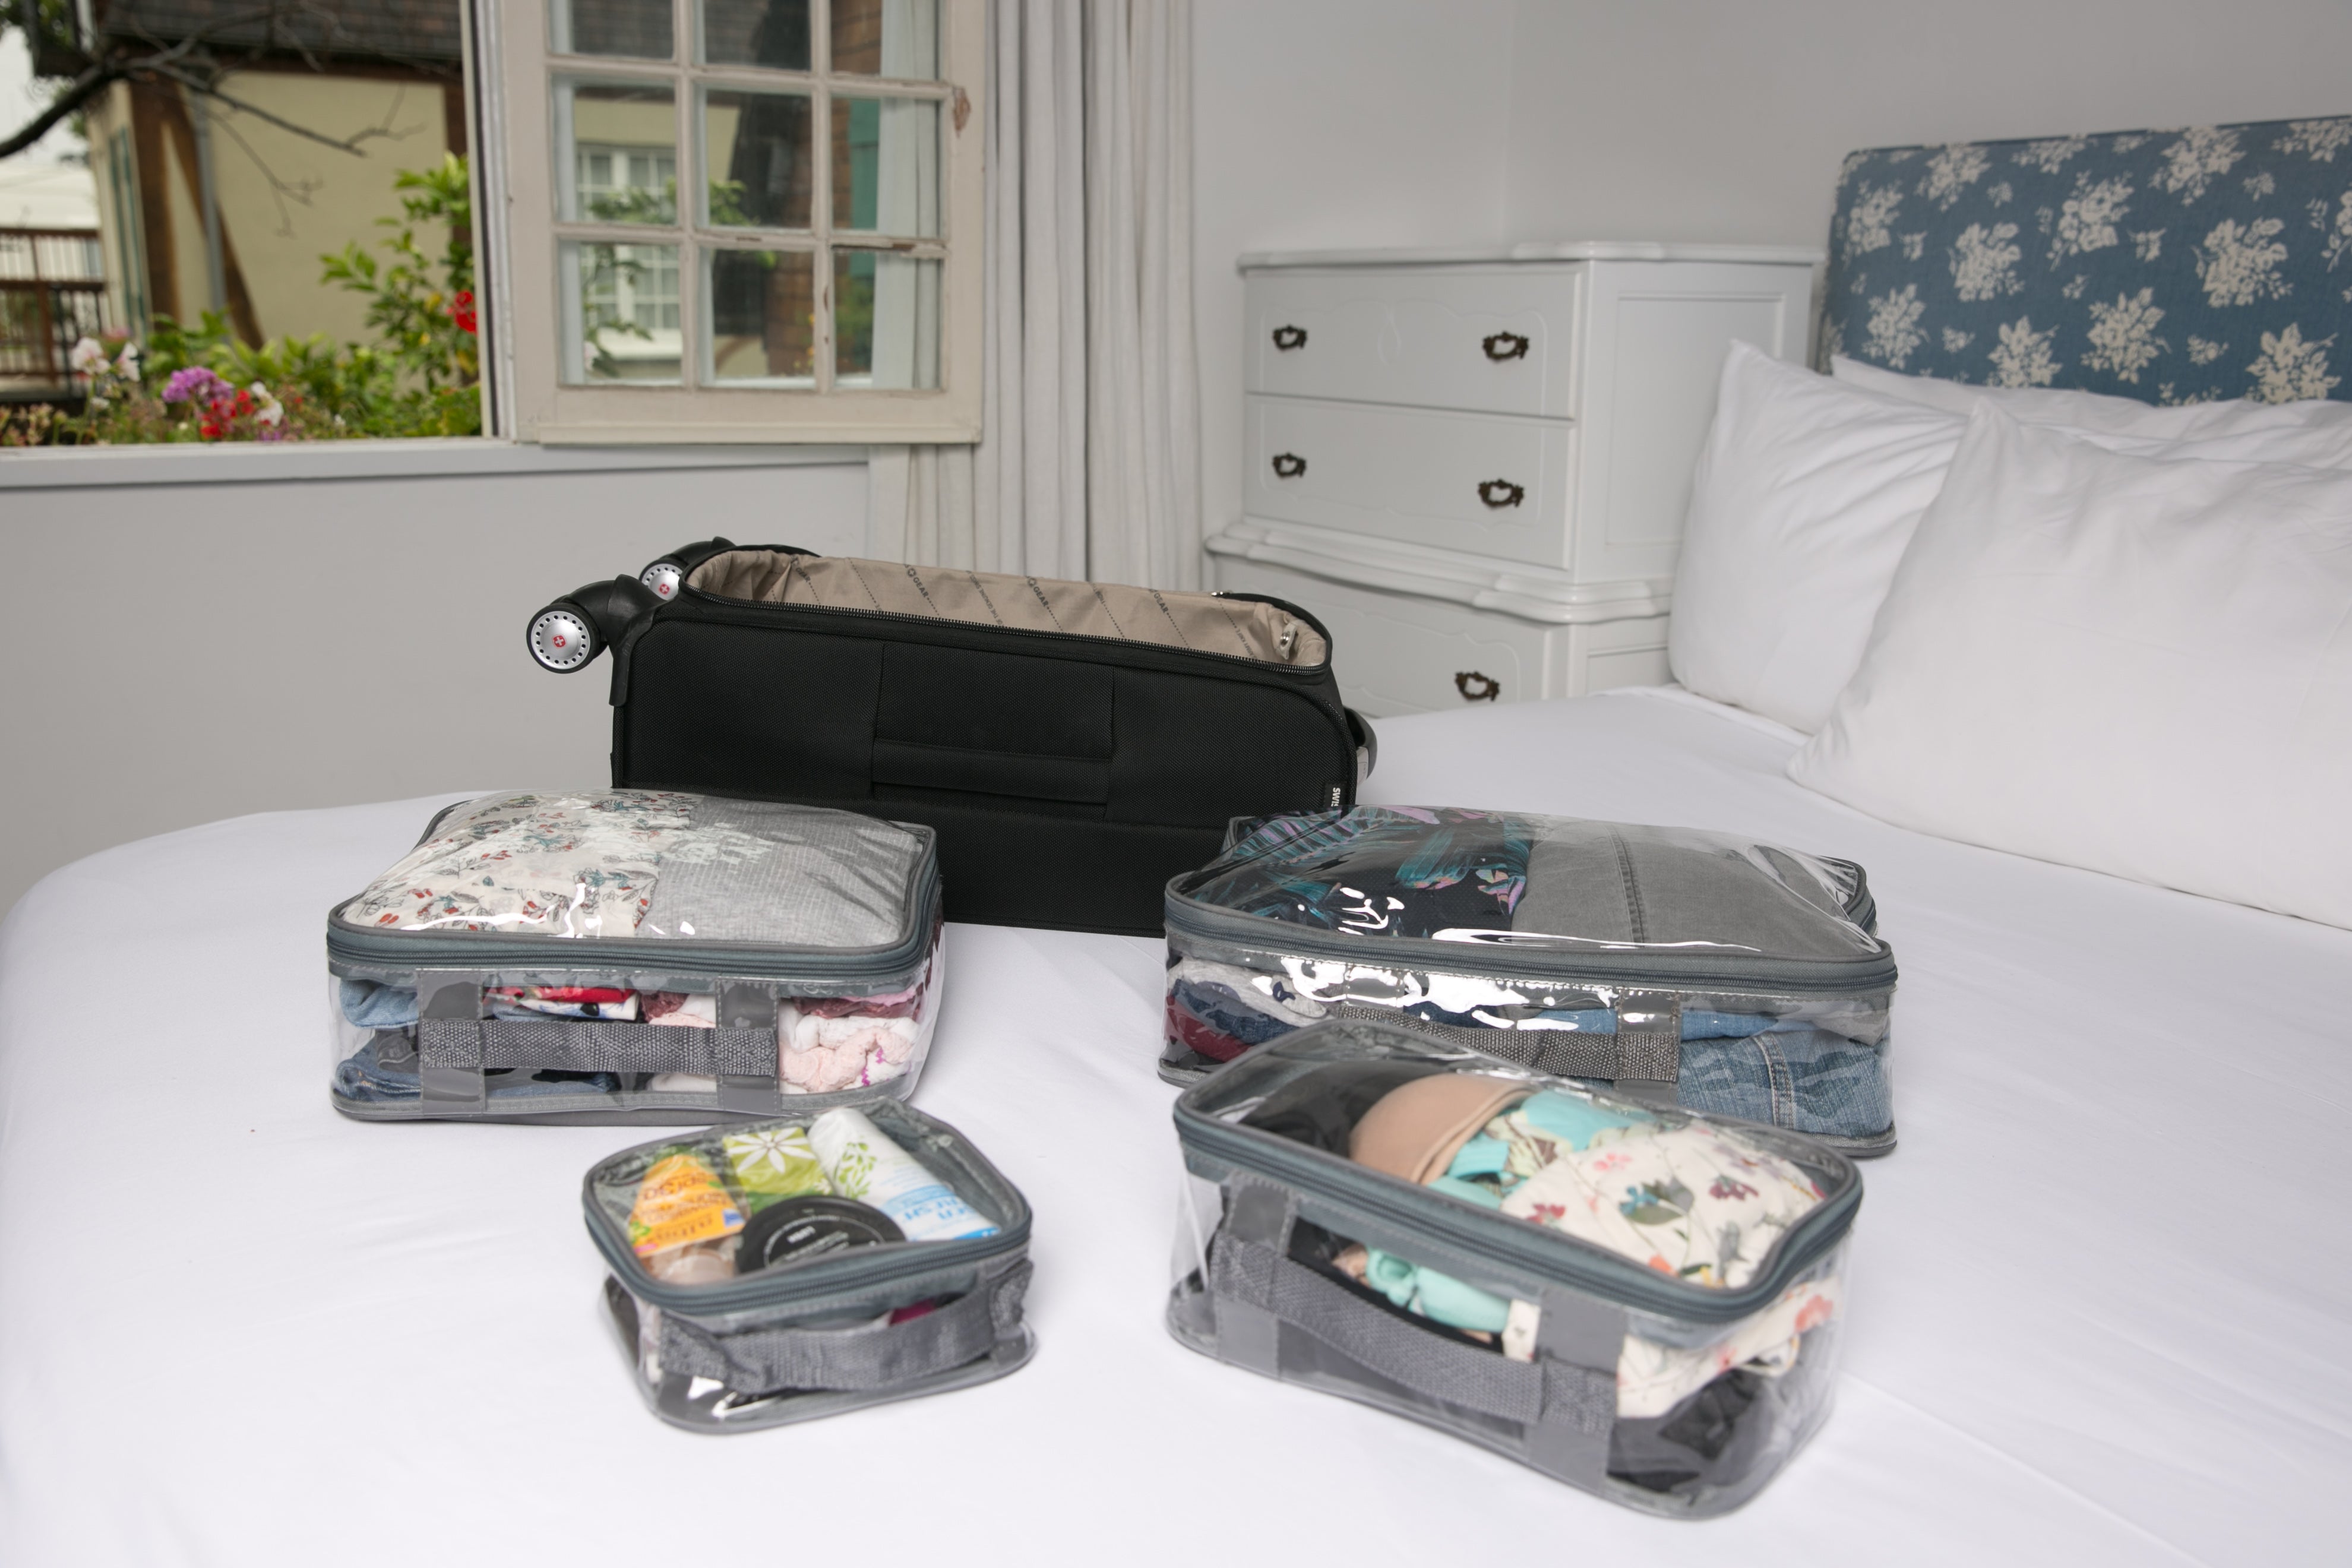 Junyuan Starter Set for an organized luggage